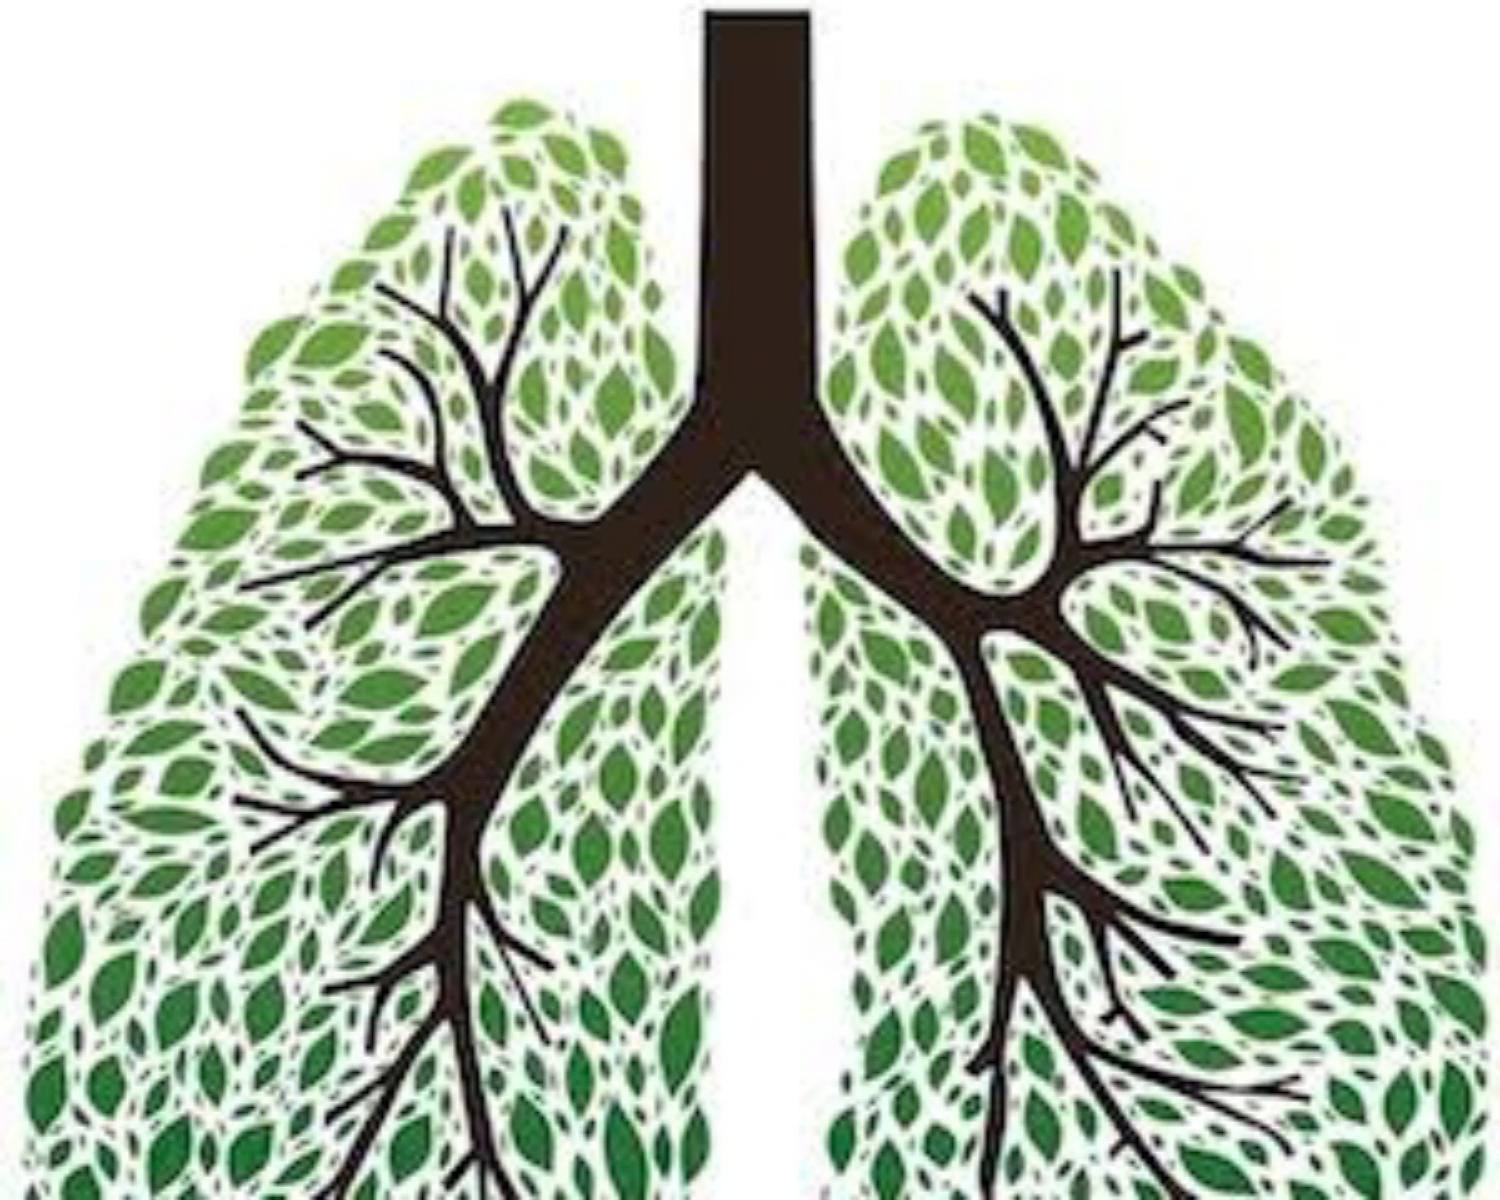 Lung capacity determines how long you will live 